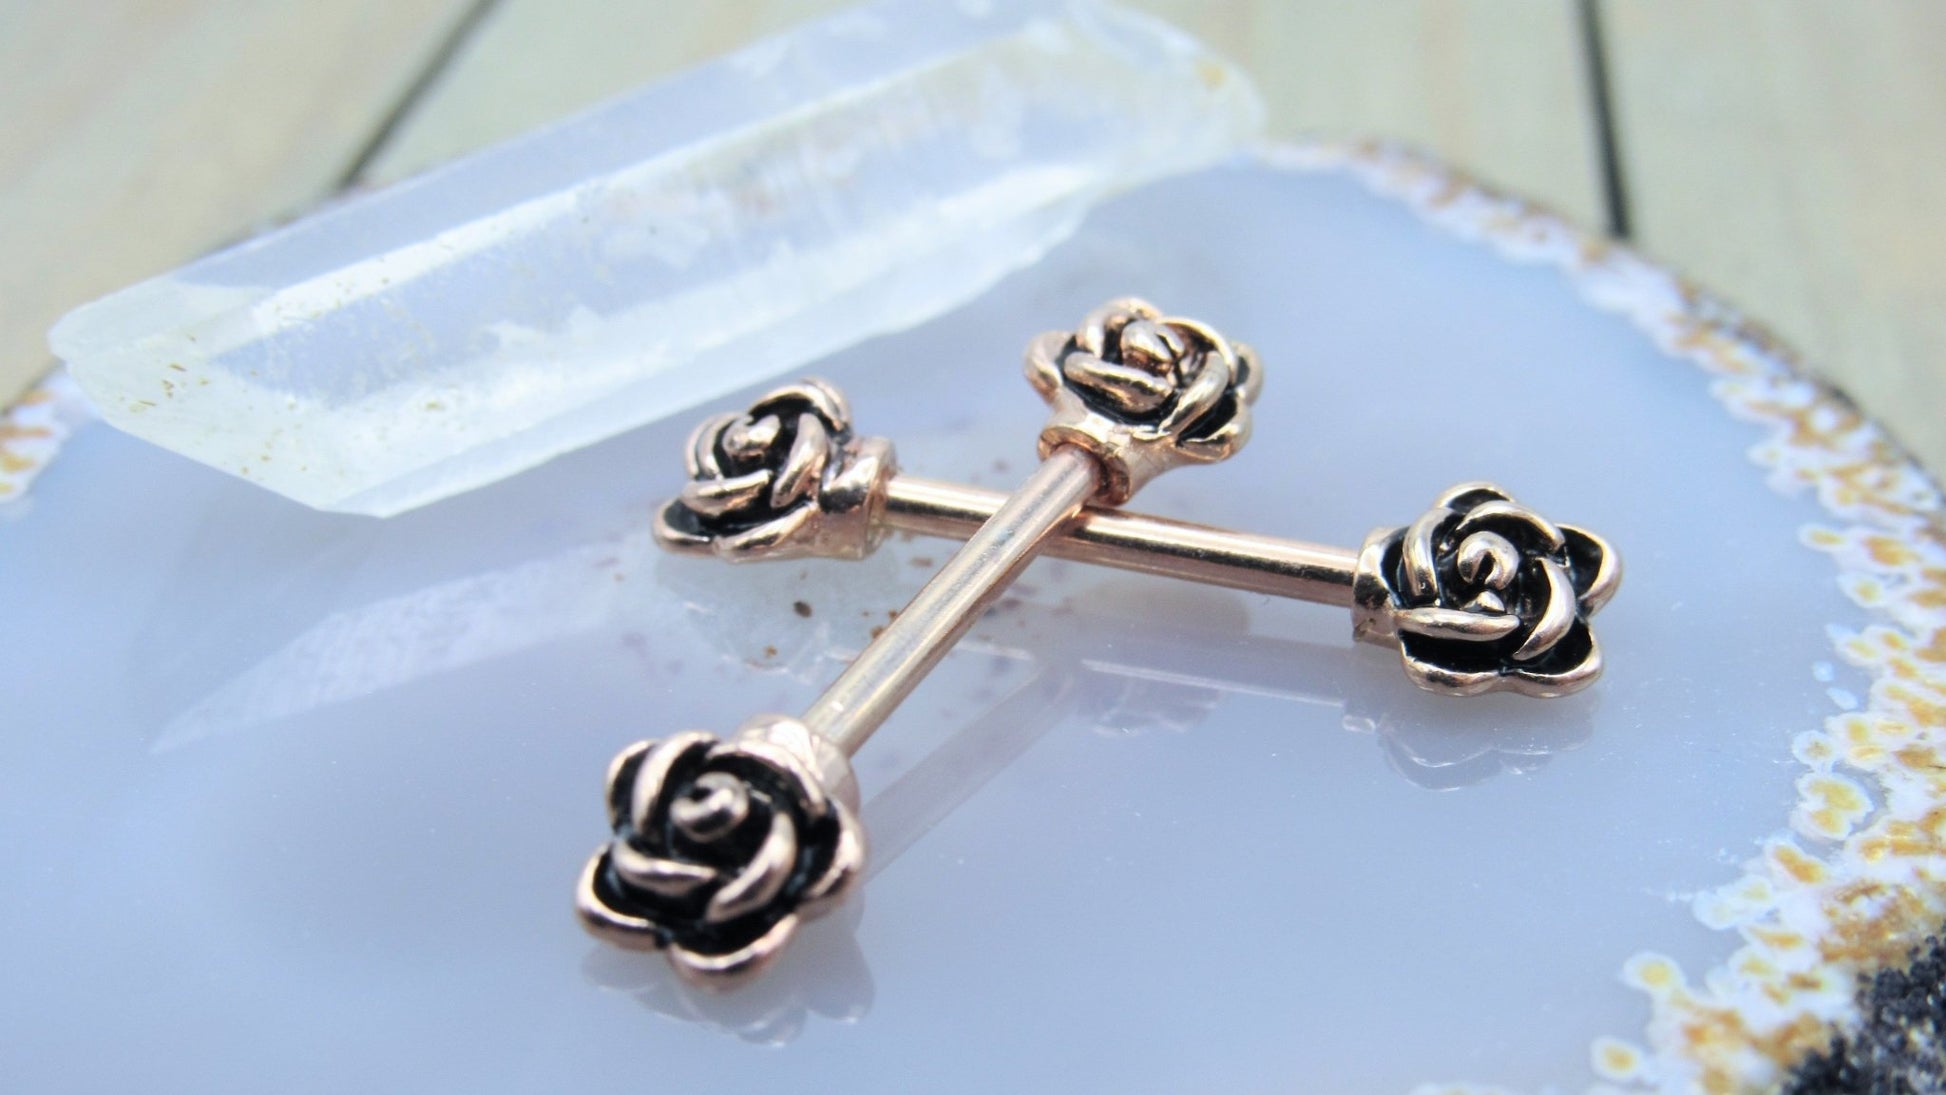 14g Rose flower nipple piercing barbell set 1/2" length rose gold over 316L stainless steel body jewelry barbells - Siren Body Jewelry